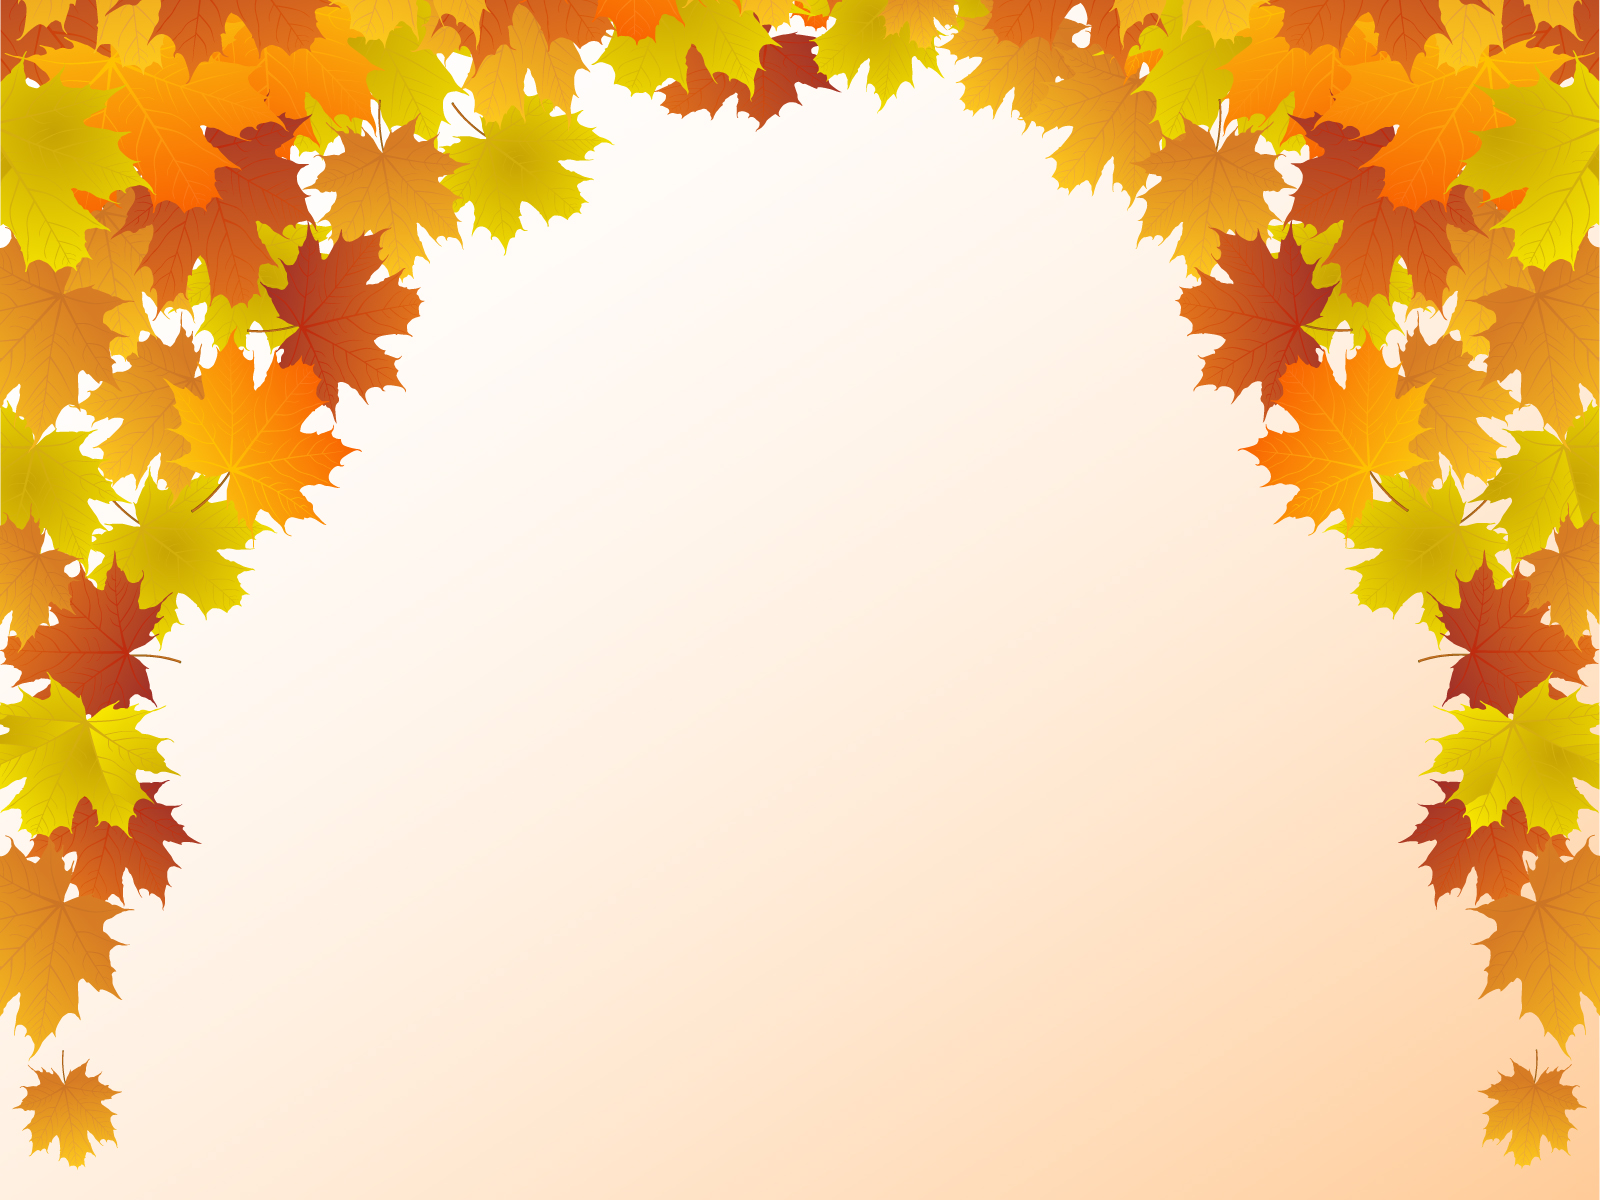 Autumn Leaf Frame Backgrounds | Beige, Black, Border & Frames, Colors,  Green, Nature, Orange, Red, White, Yellow Templates | Free PPT Grounds